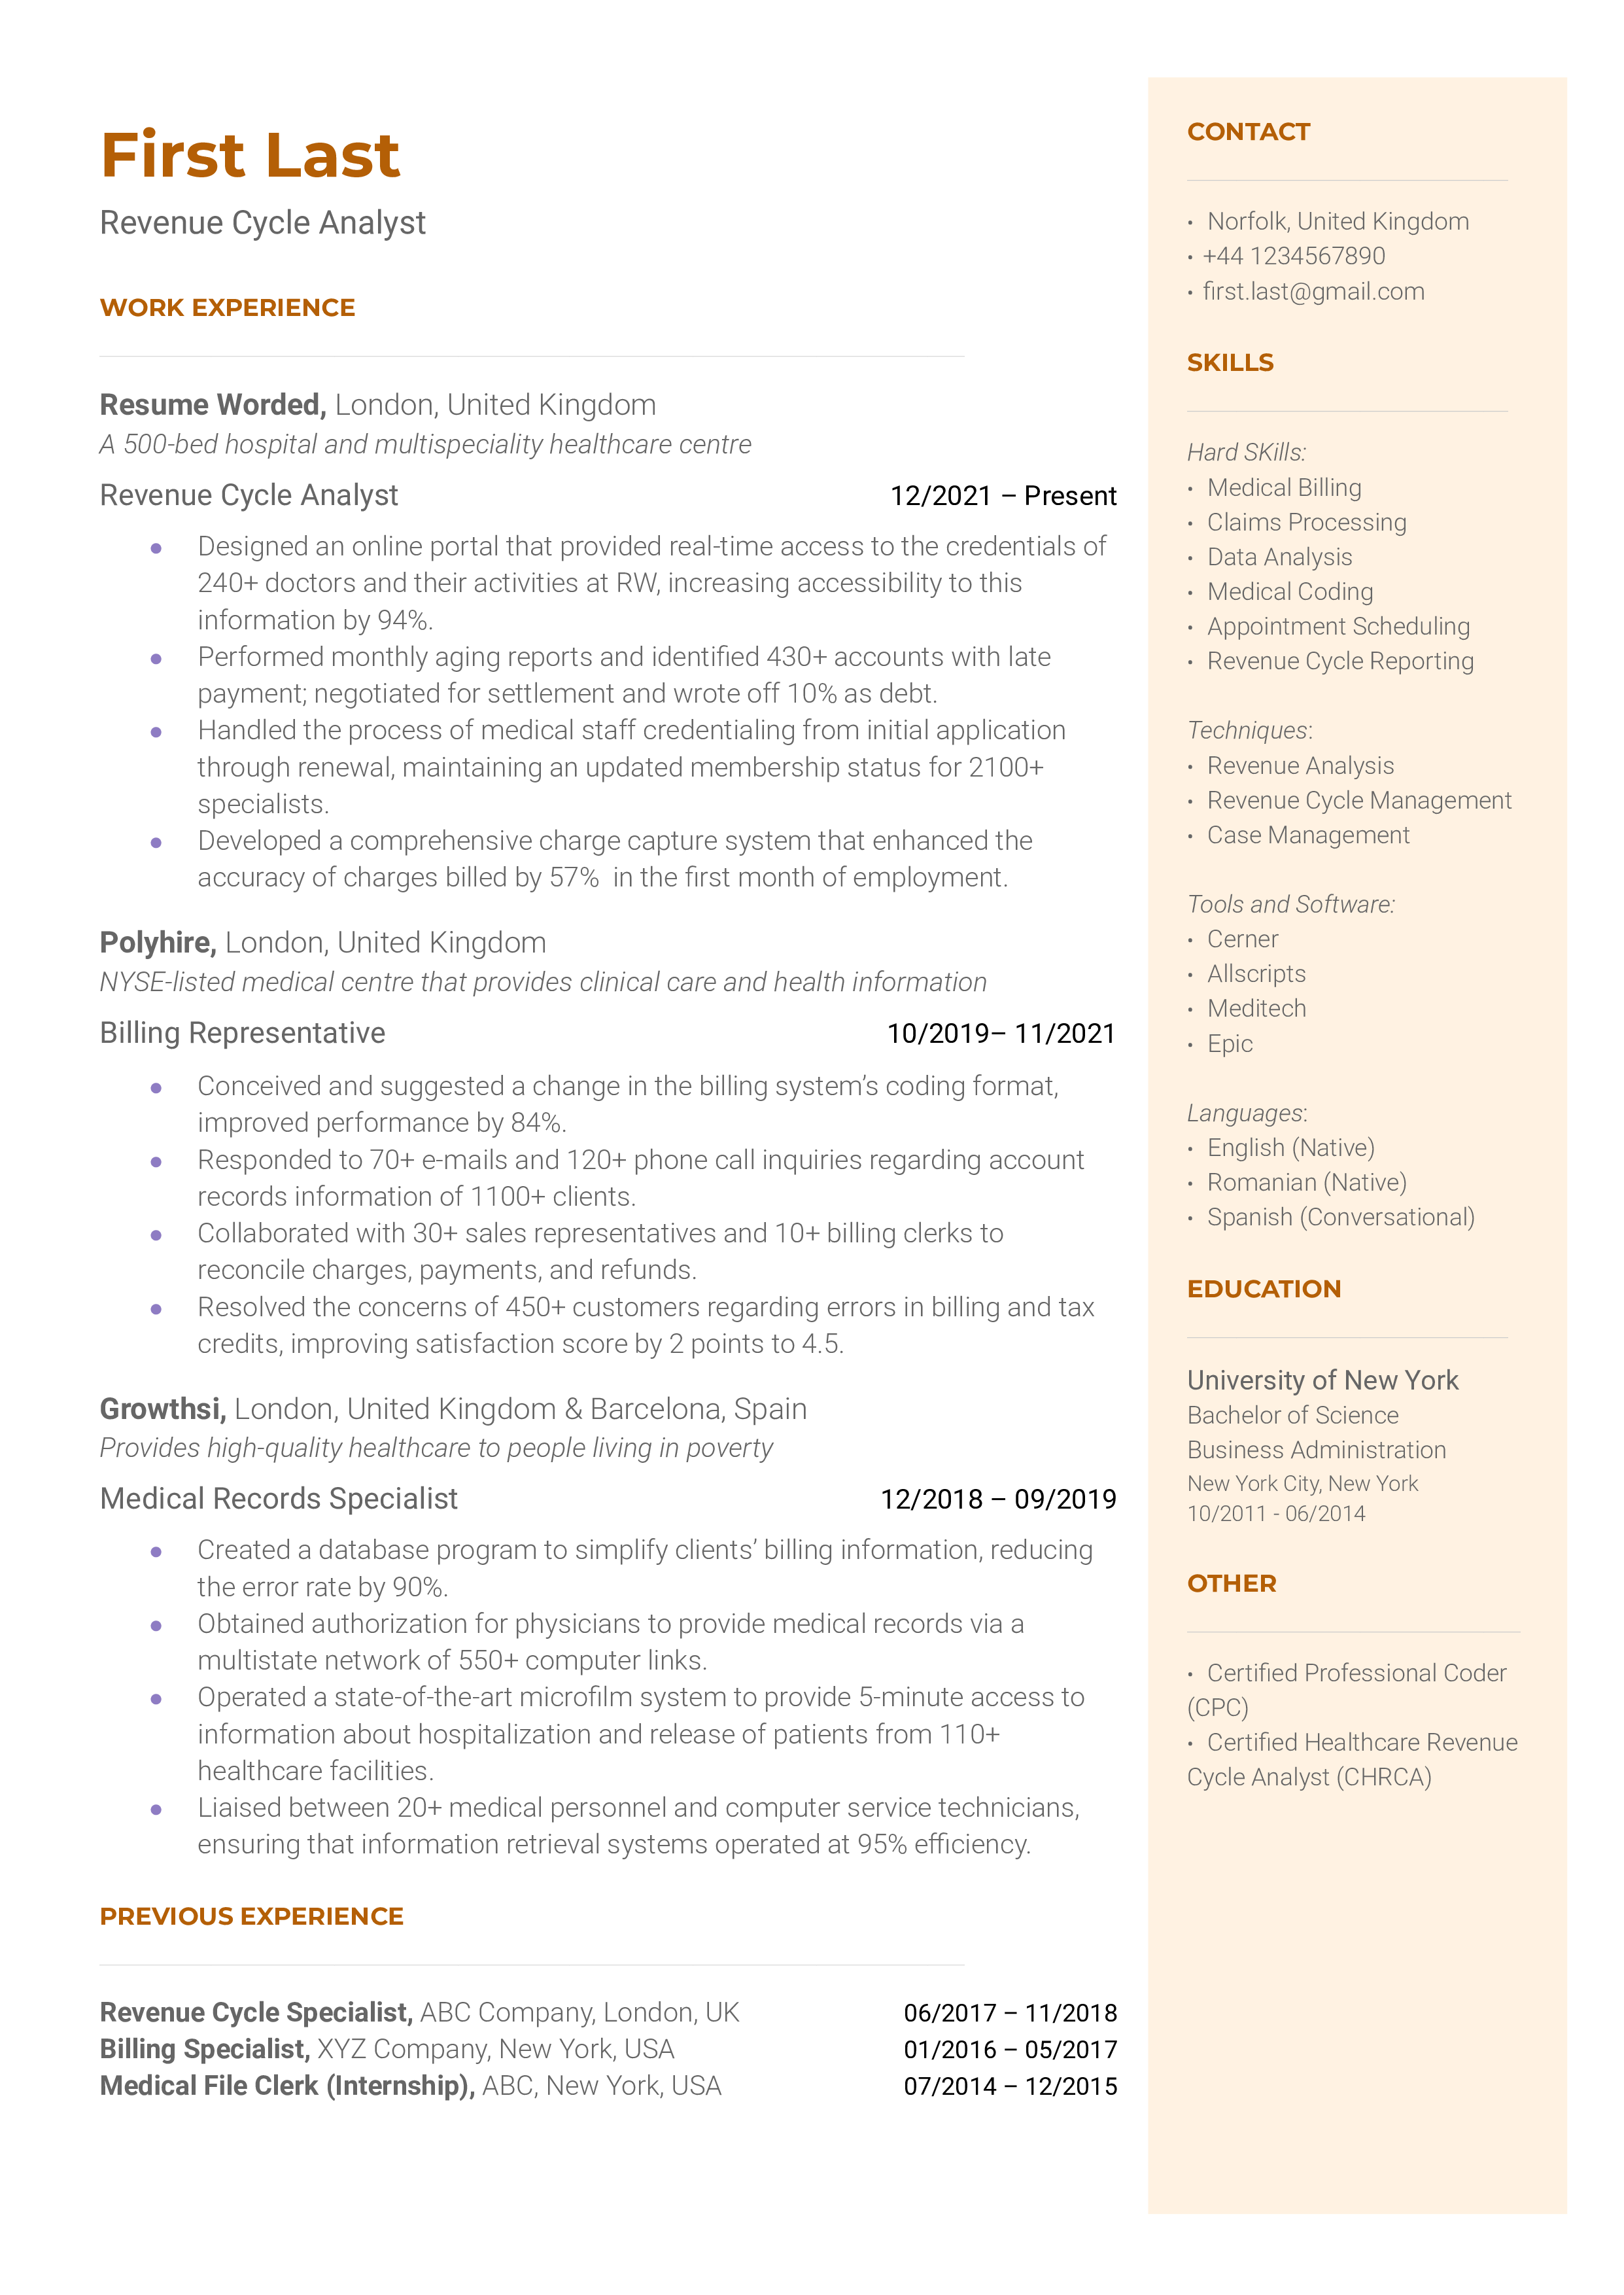 A revenue cycle analyst resume template including professional certifications.